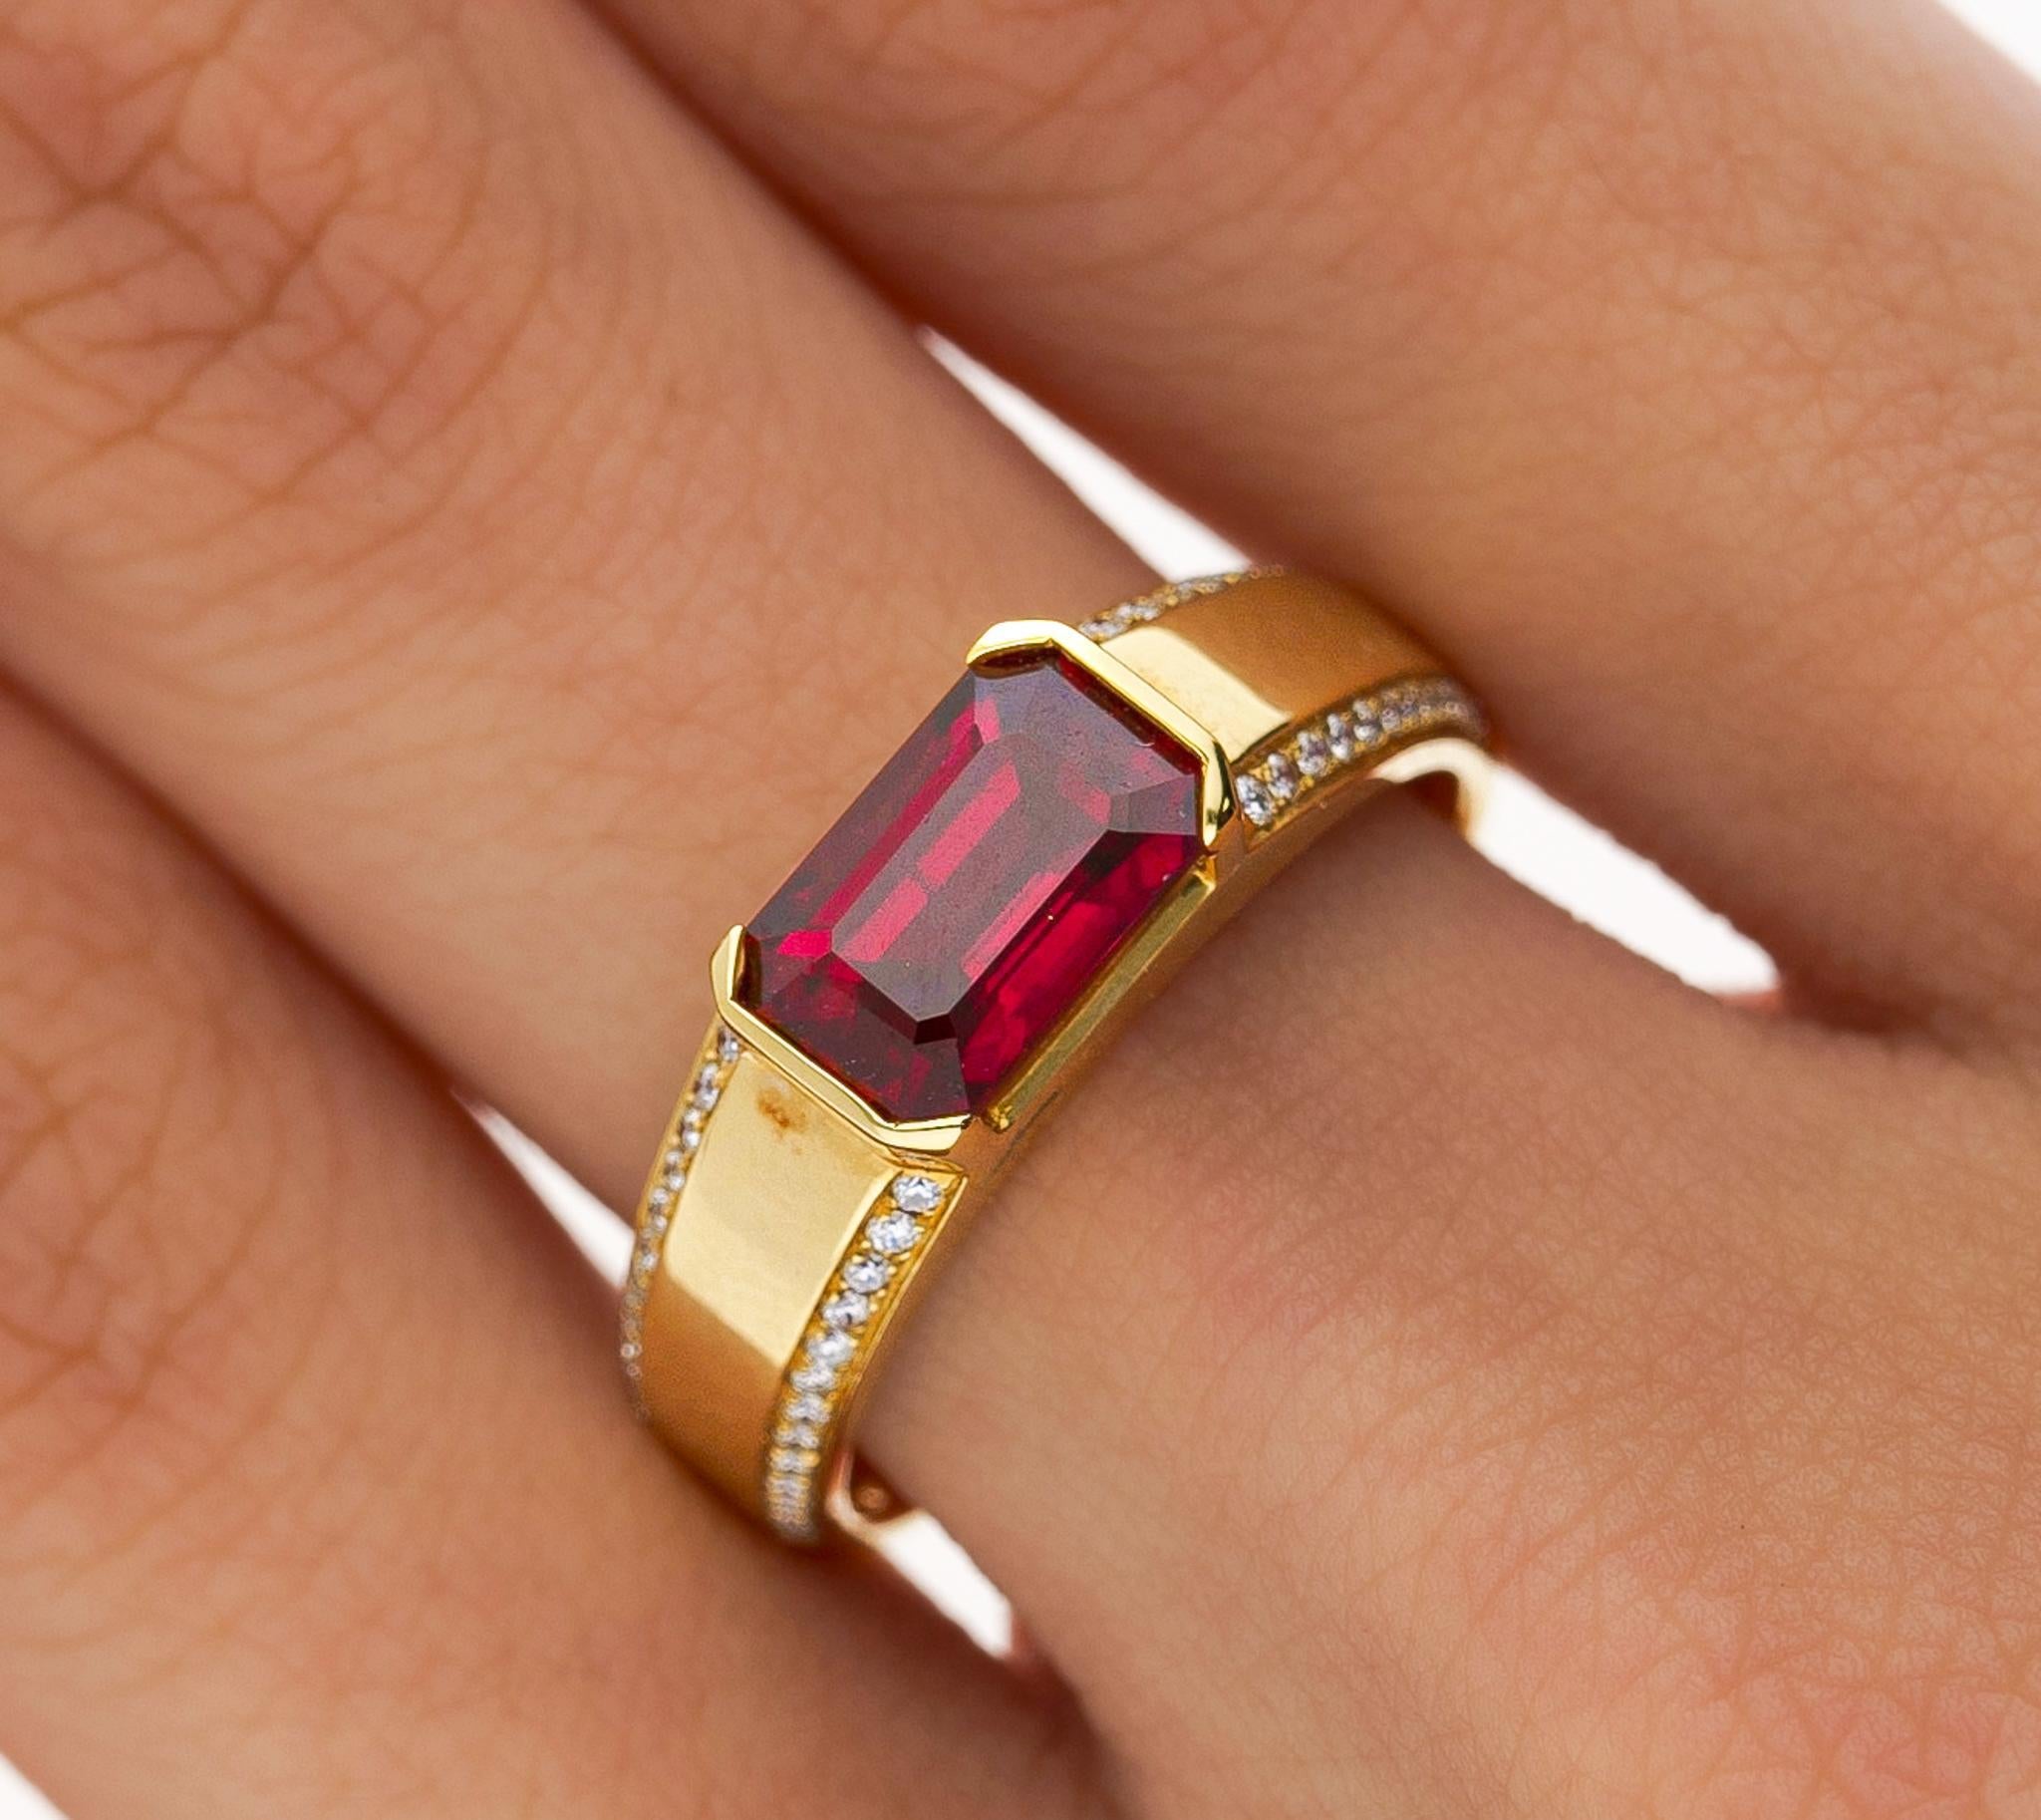 2.09 Carat Vivid Red Pigeon's Blood Burma Ruby Emerald Cut East-West Ring For Sale 6